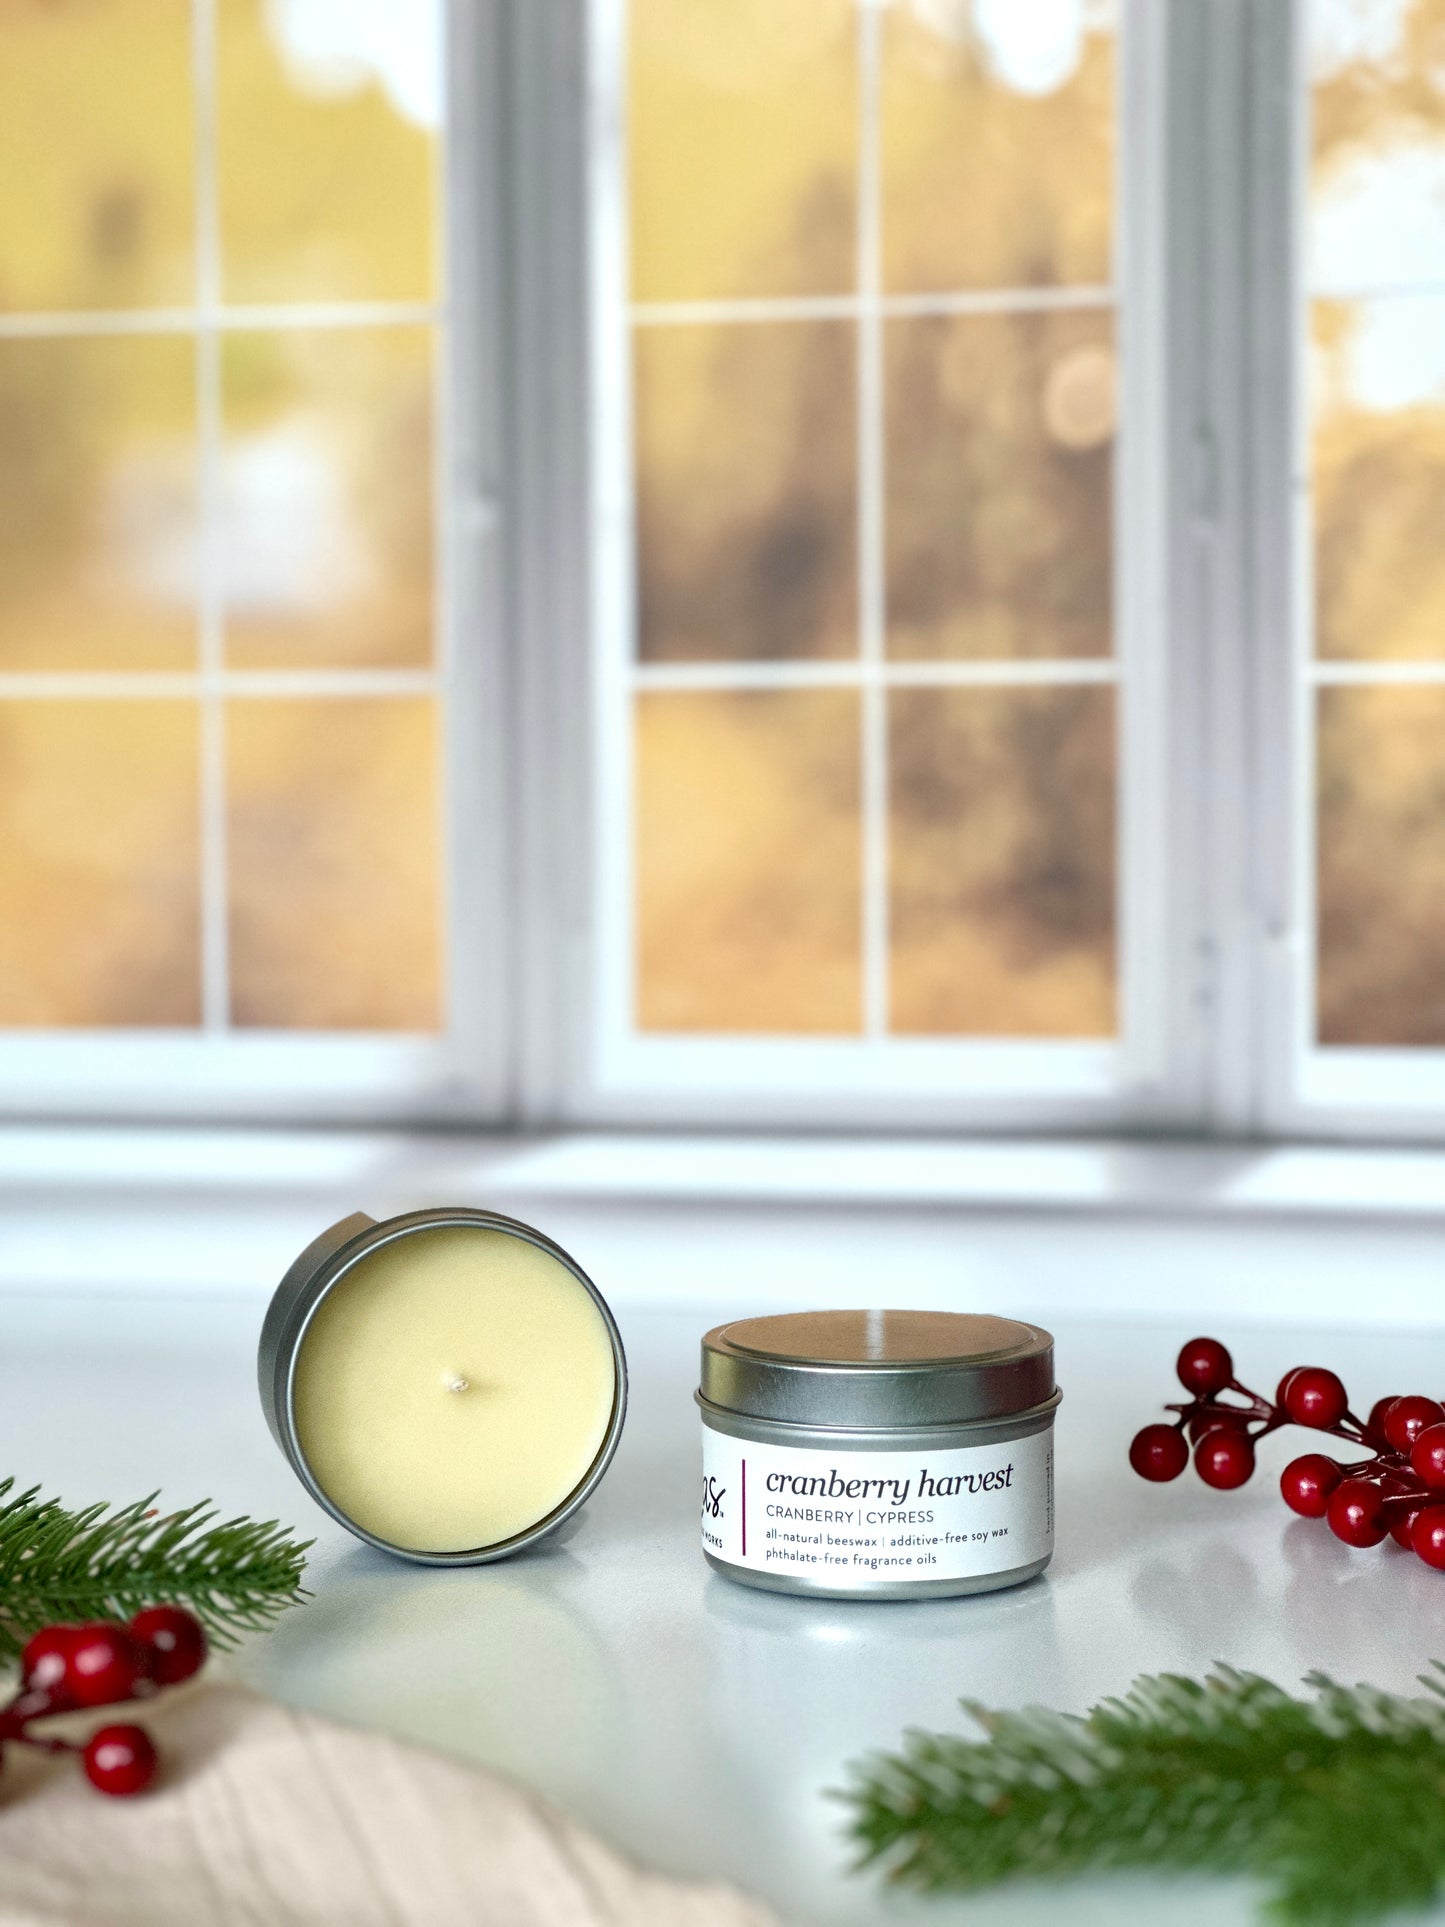 Embrace the essence of fall with our cranberry and cypress fragrance. A 3.5oz candle travel tin lays open, showcasing its beautiful yellow tinted beeswax and soy blend beside another travel tin. Cranberry strands frame the scene, while cypress adds a touch of nature's beauty. The backdrop of blurred yellow fall leaves outside a window completes the seasonal display.